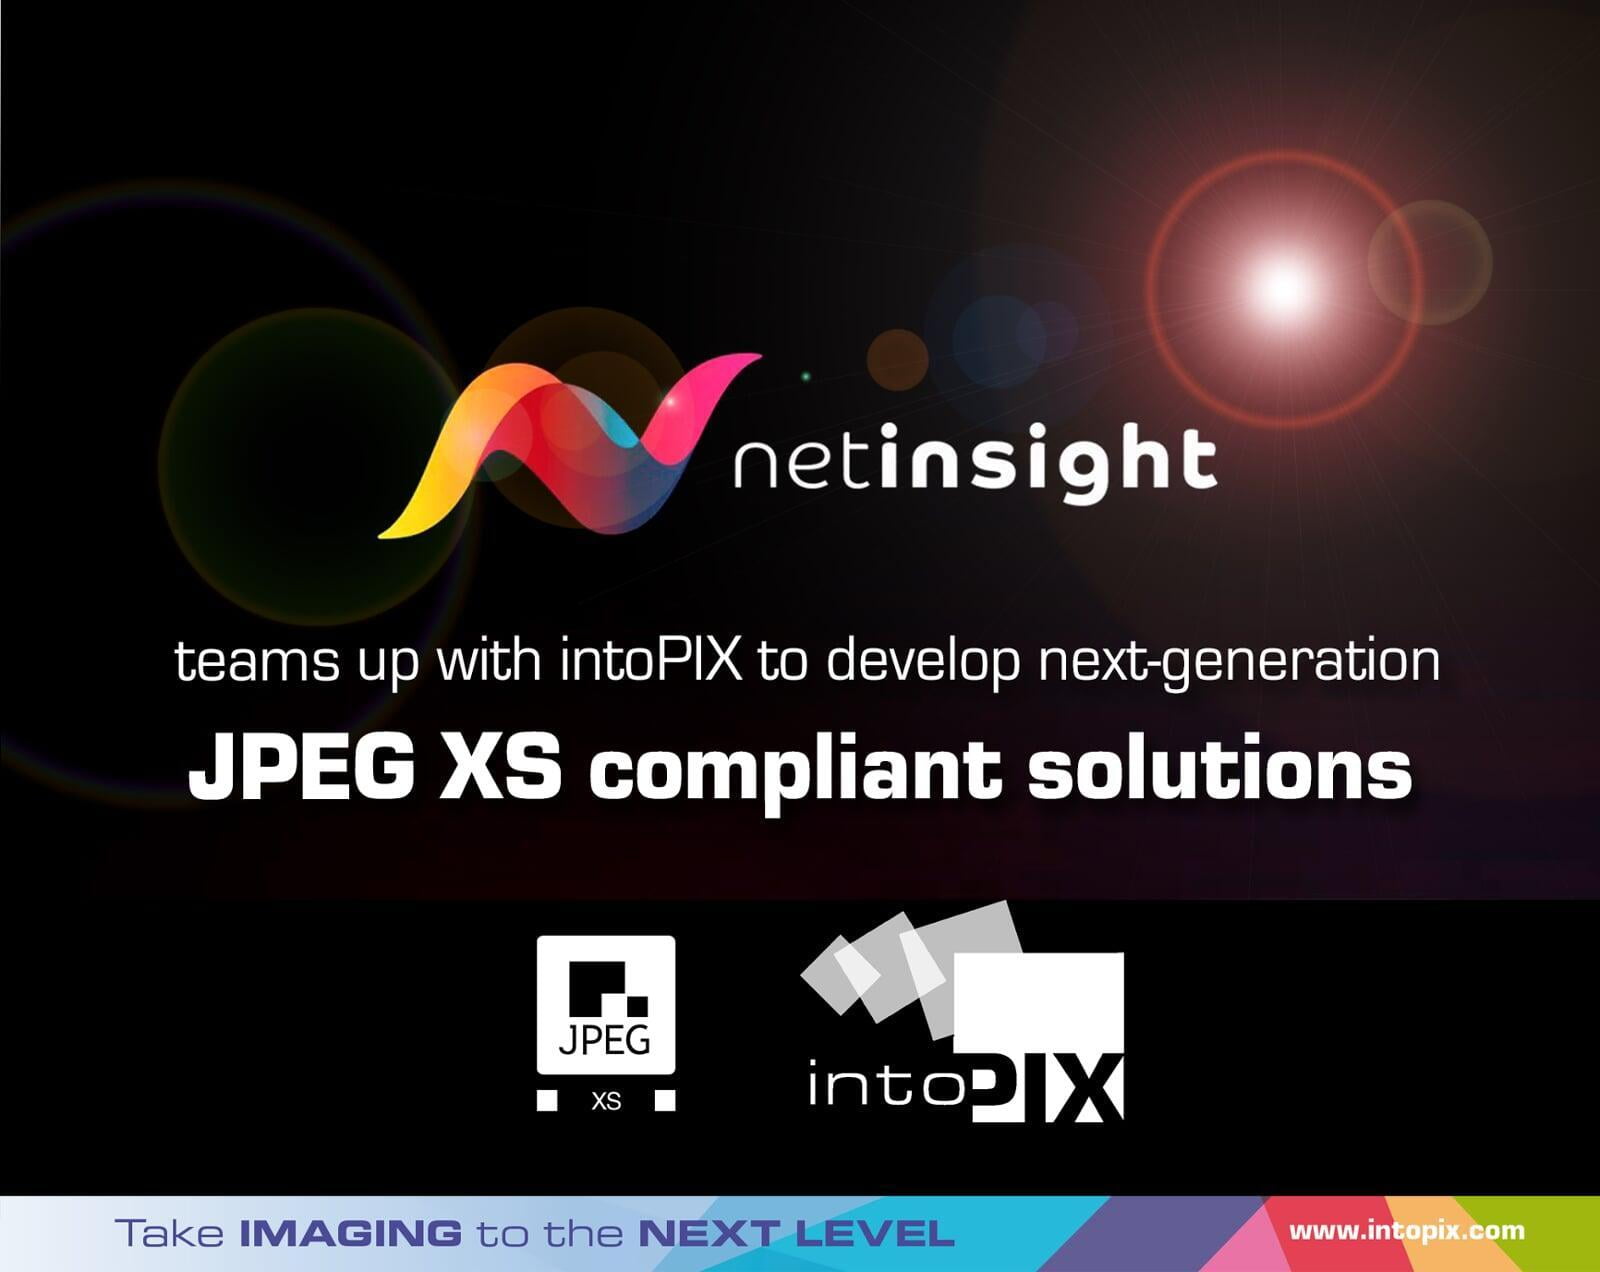 Net Insight teams up with intoPIX to develop next-generation JPEG XS compliant solutions